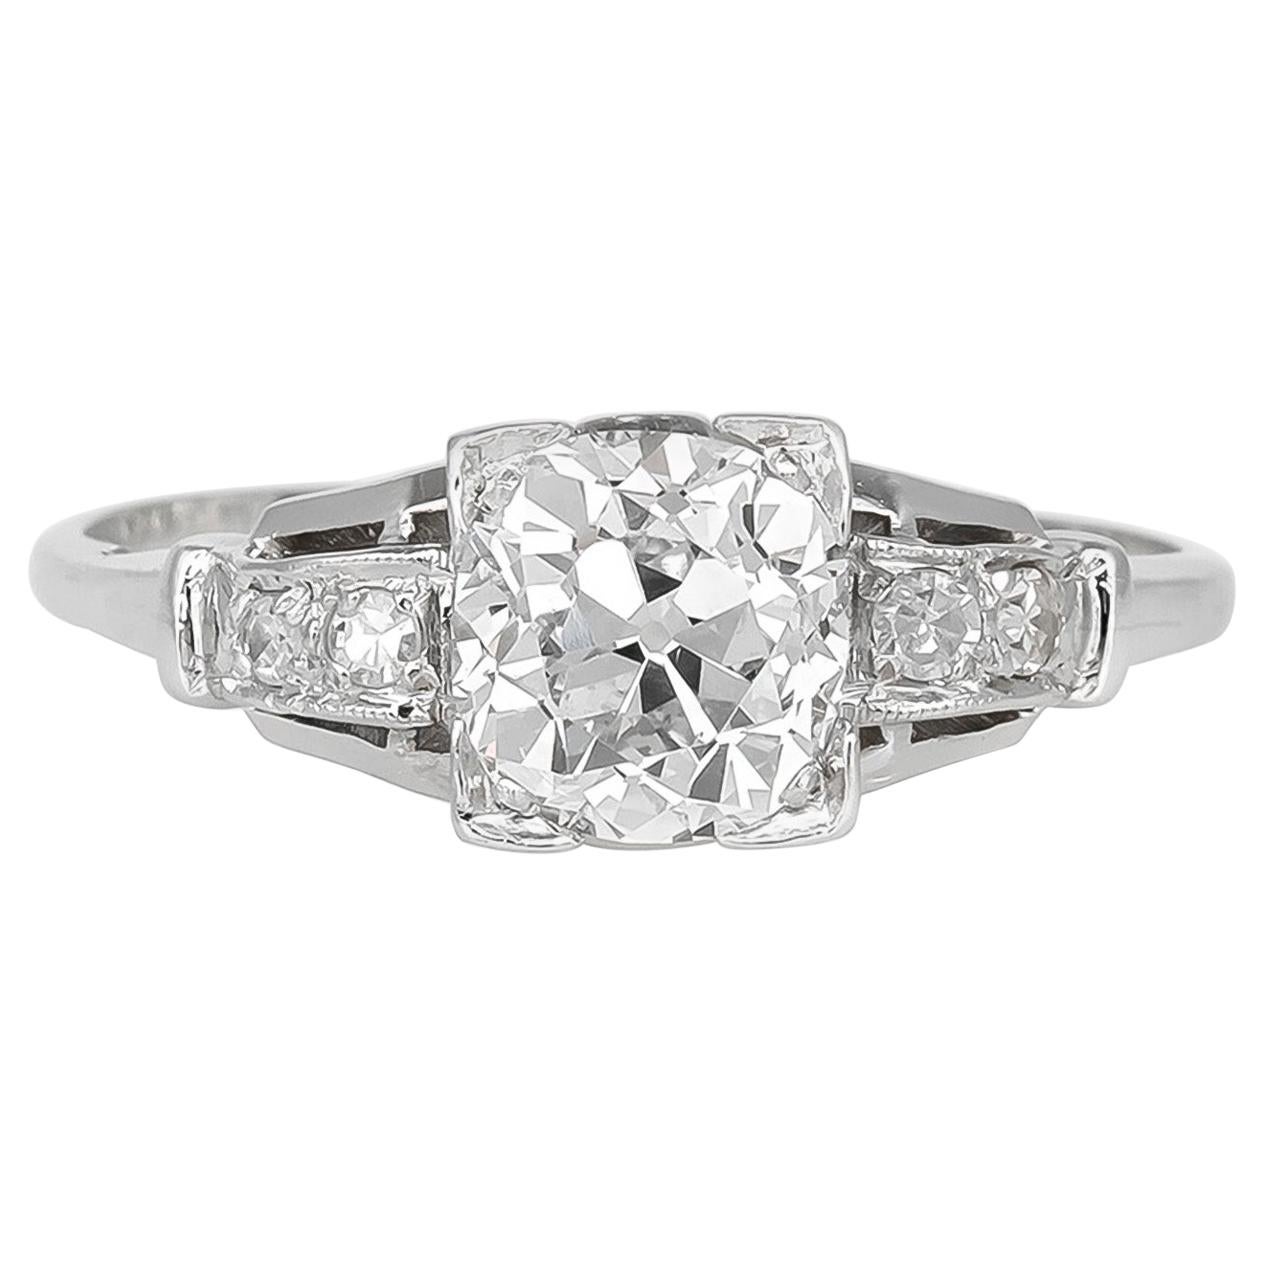 1920s-1930s GIA Platinum with Diamond Engagement Ring